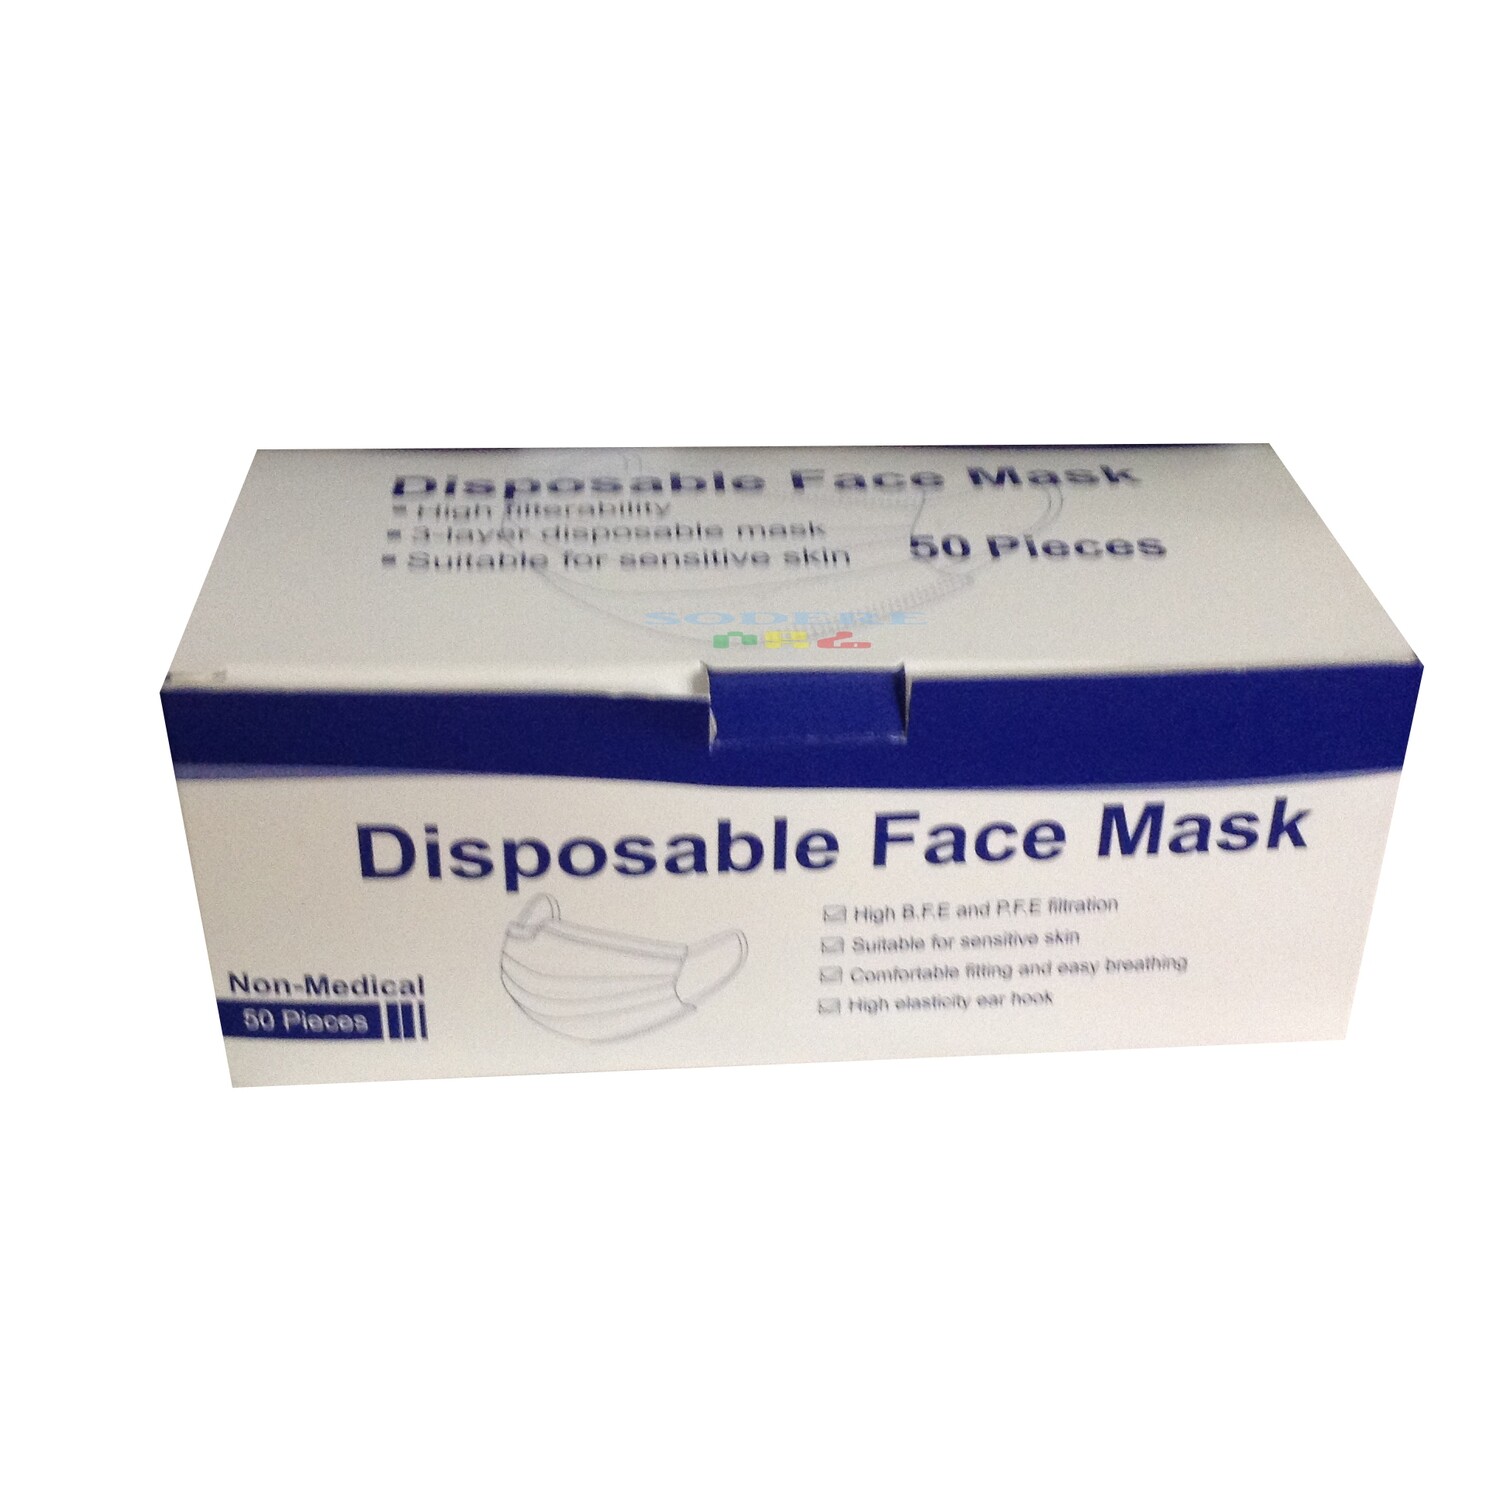 Disposable Face Mask (Ethiopia only)